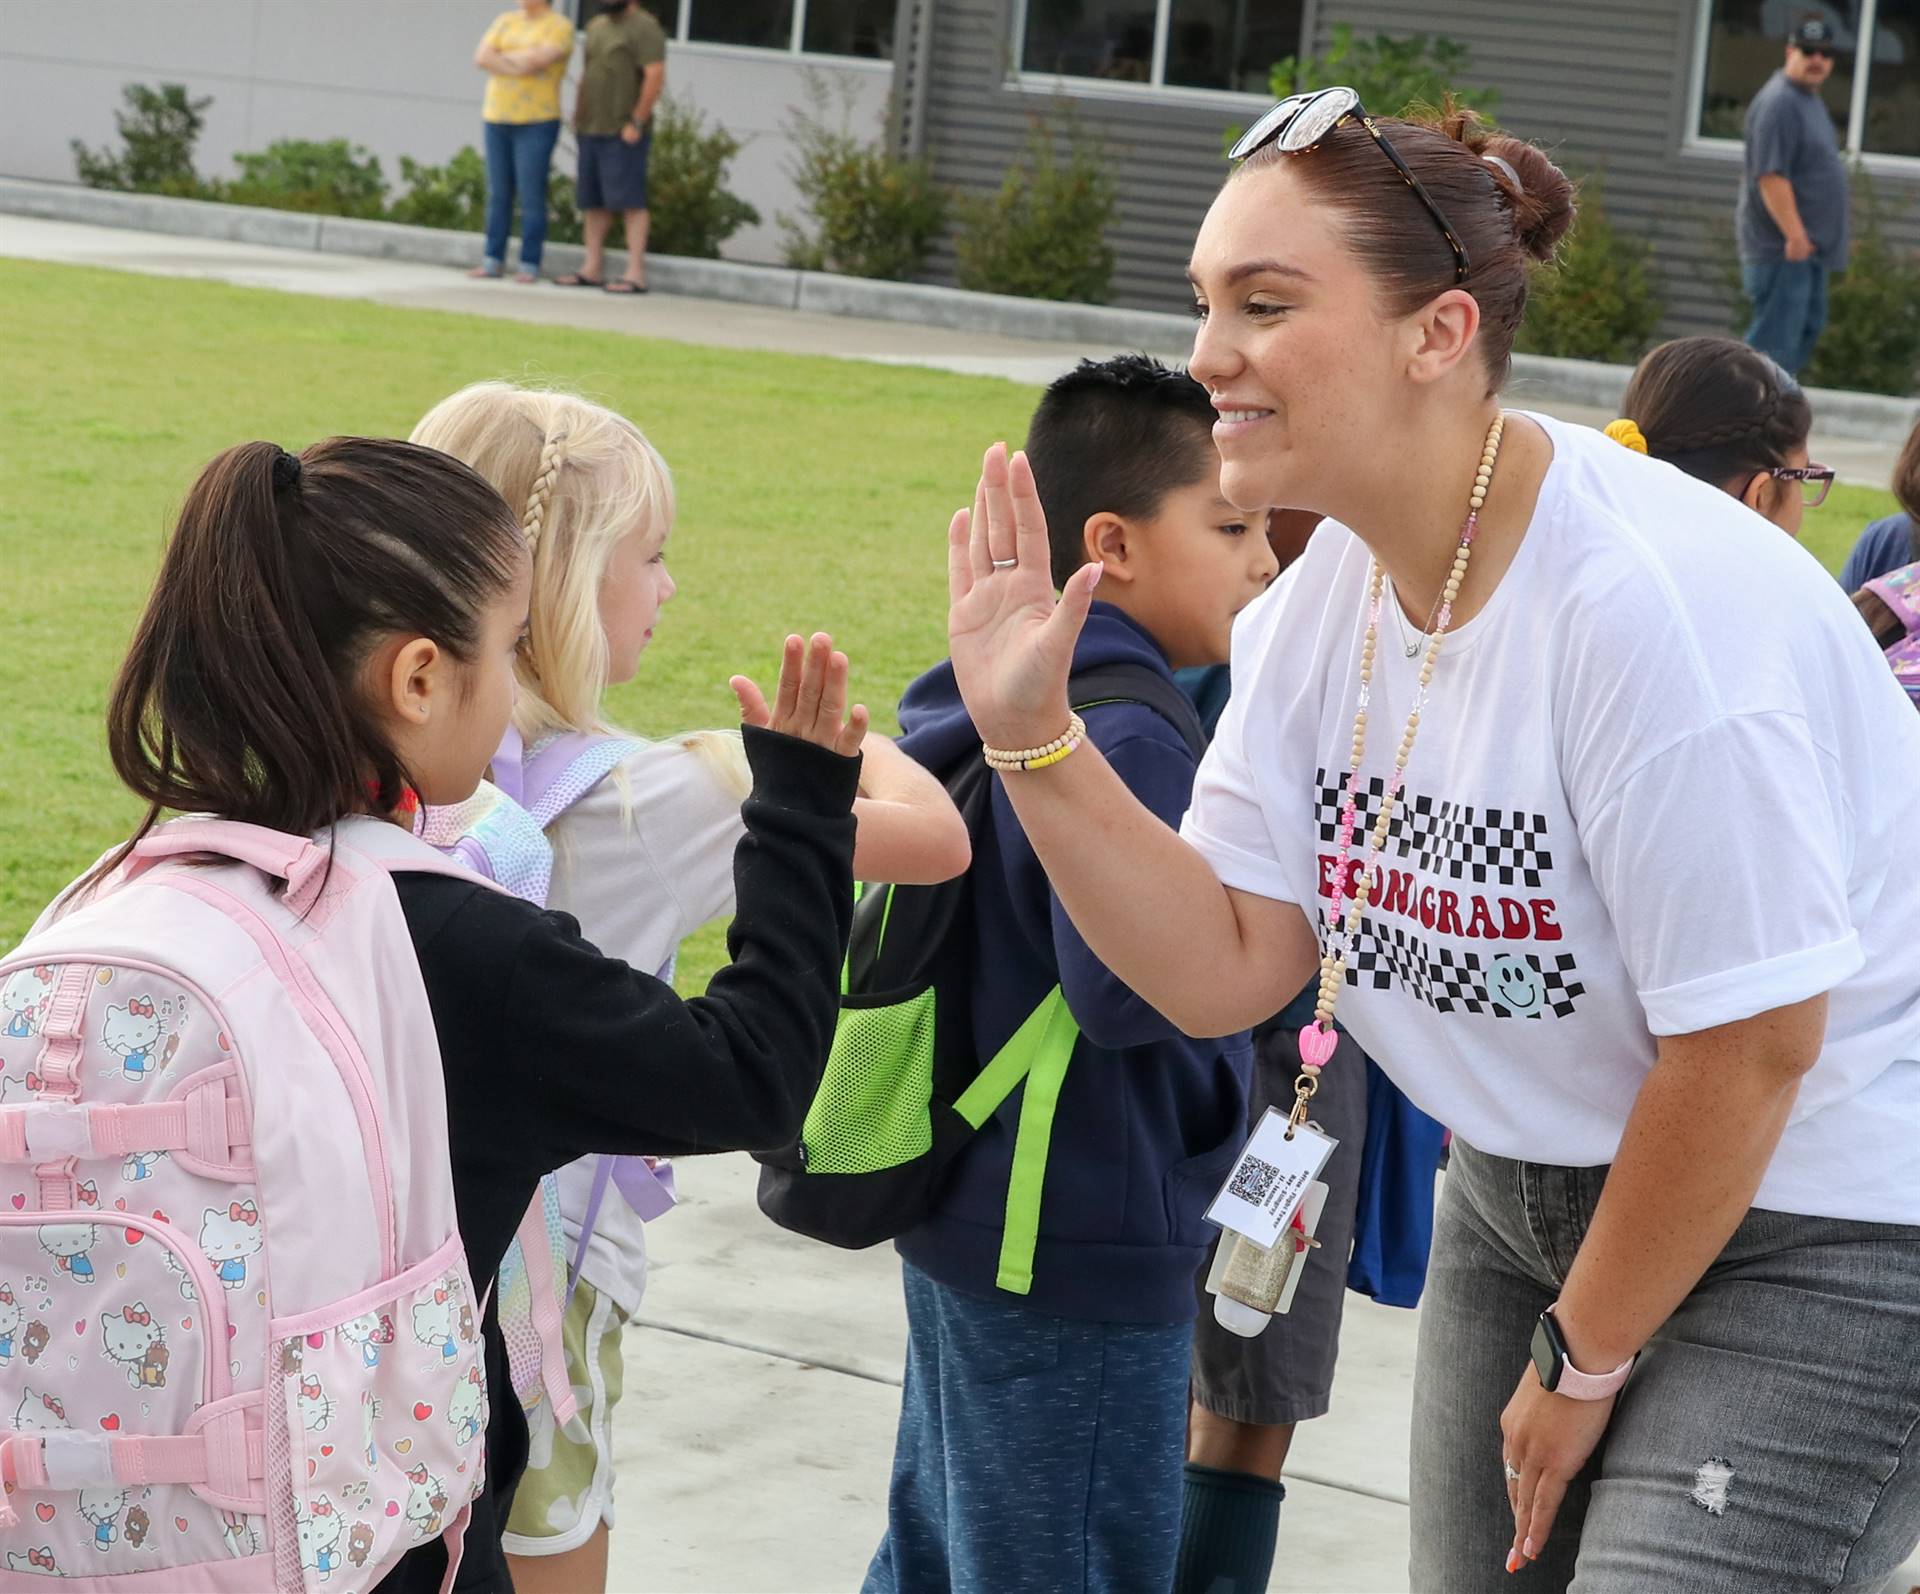 Teacher welcoming student on first day of school with a high-five.